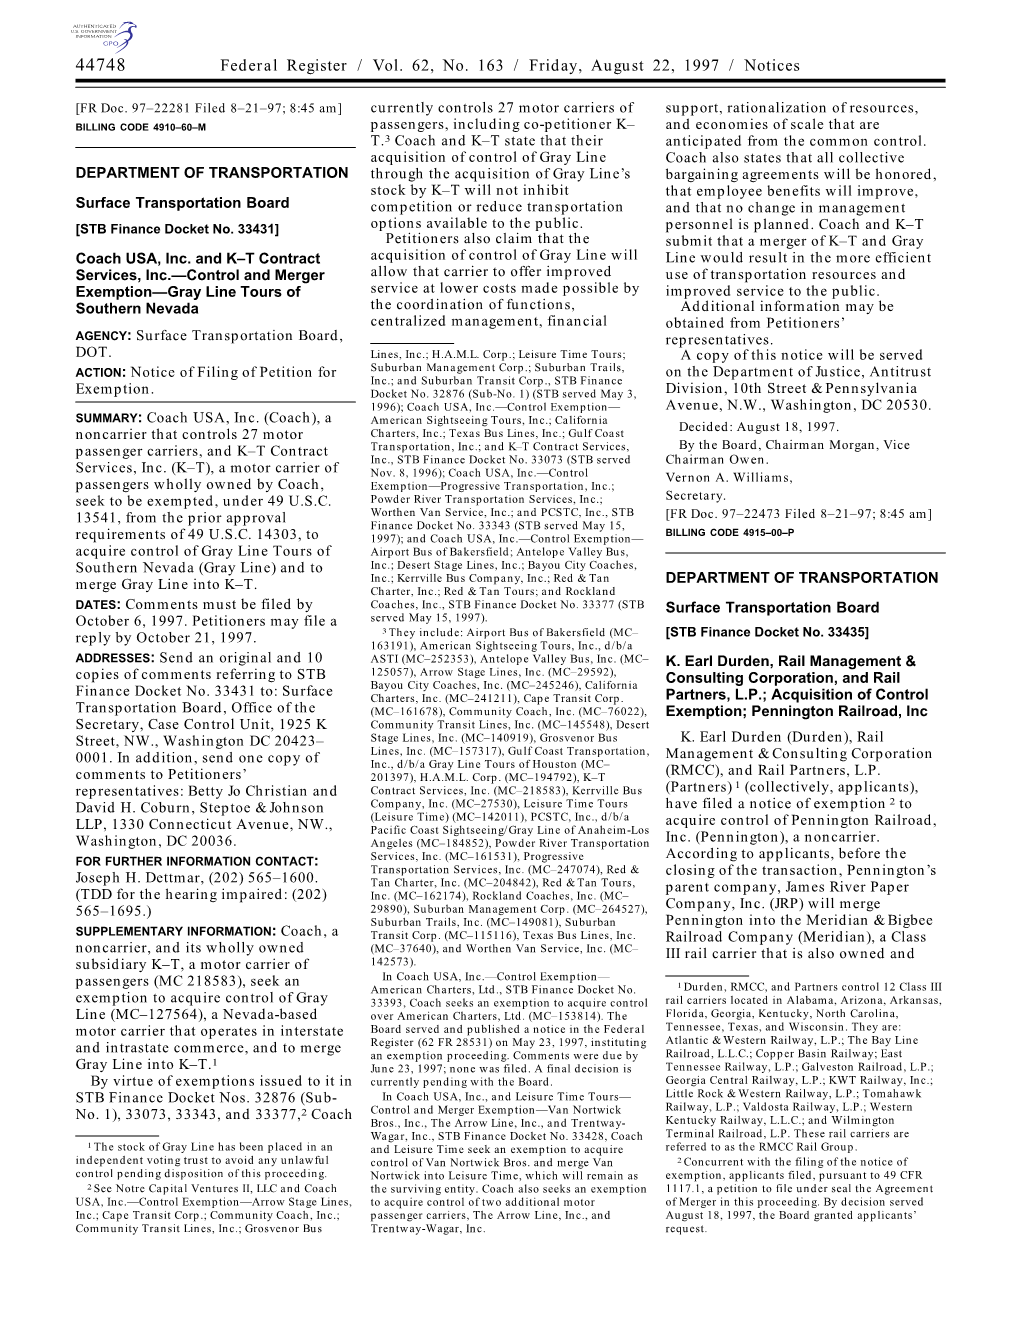 Federal Register / Vol. 62, No. 163 / Friday, August 22, 1997 / Notices